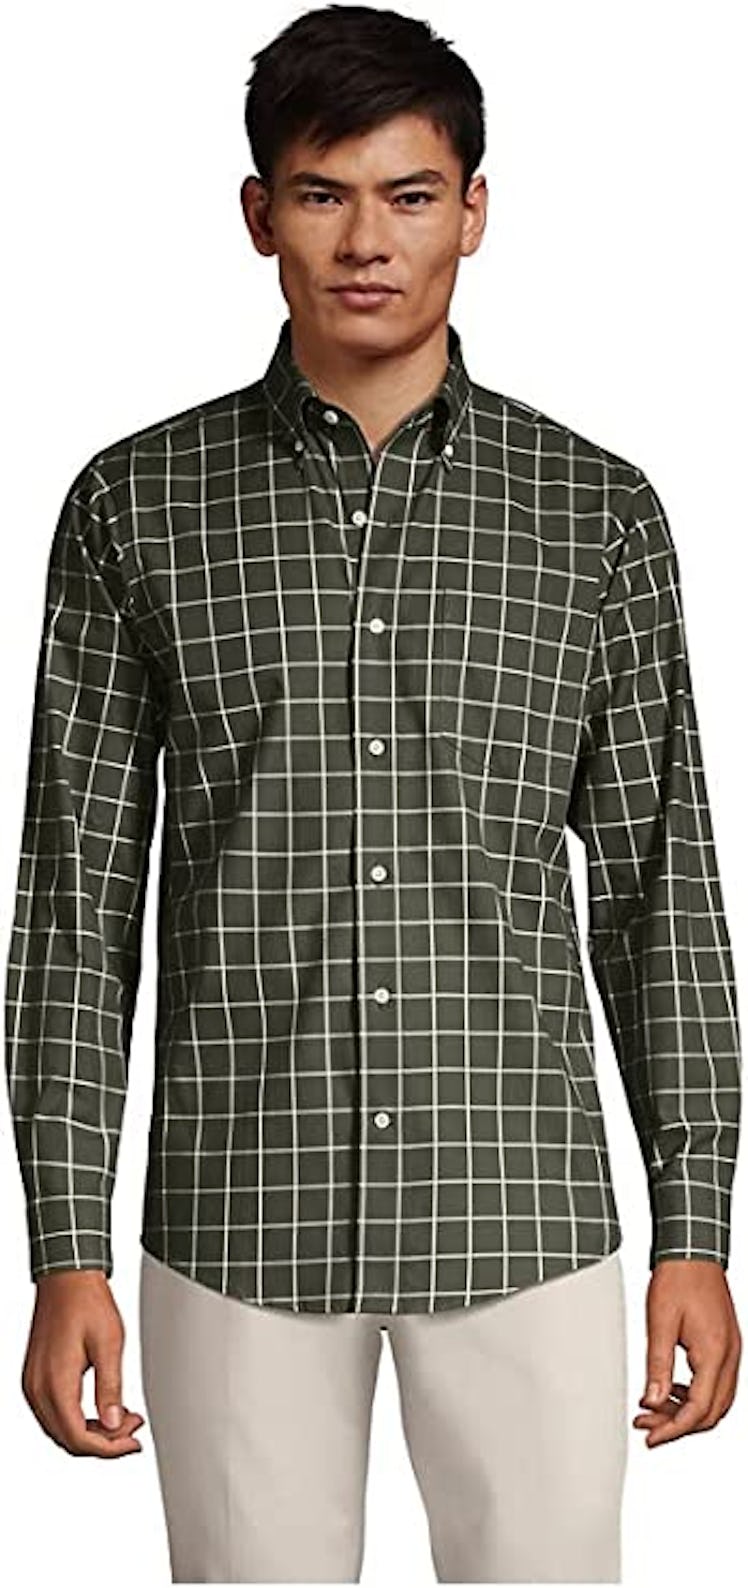 Done in plaid that can be dressed up or down, this Lands' End option is one of the best non-iron dre...